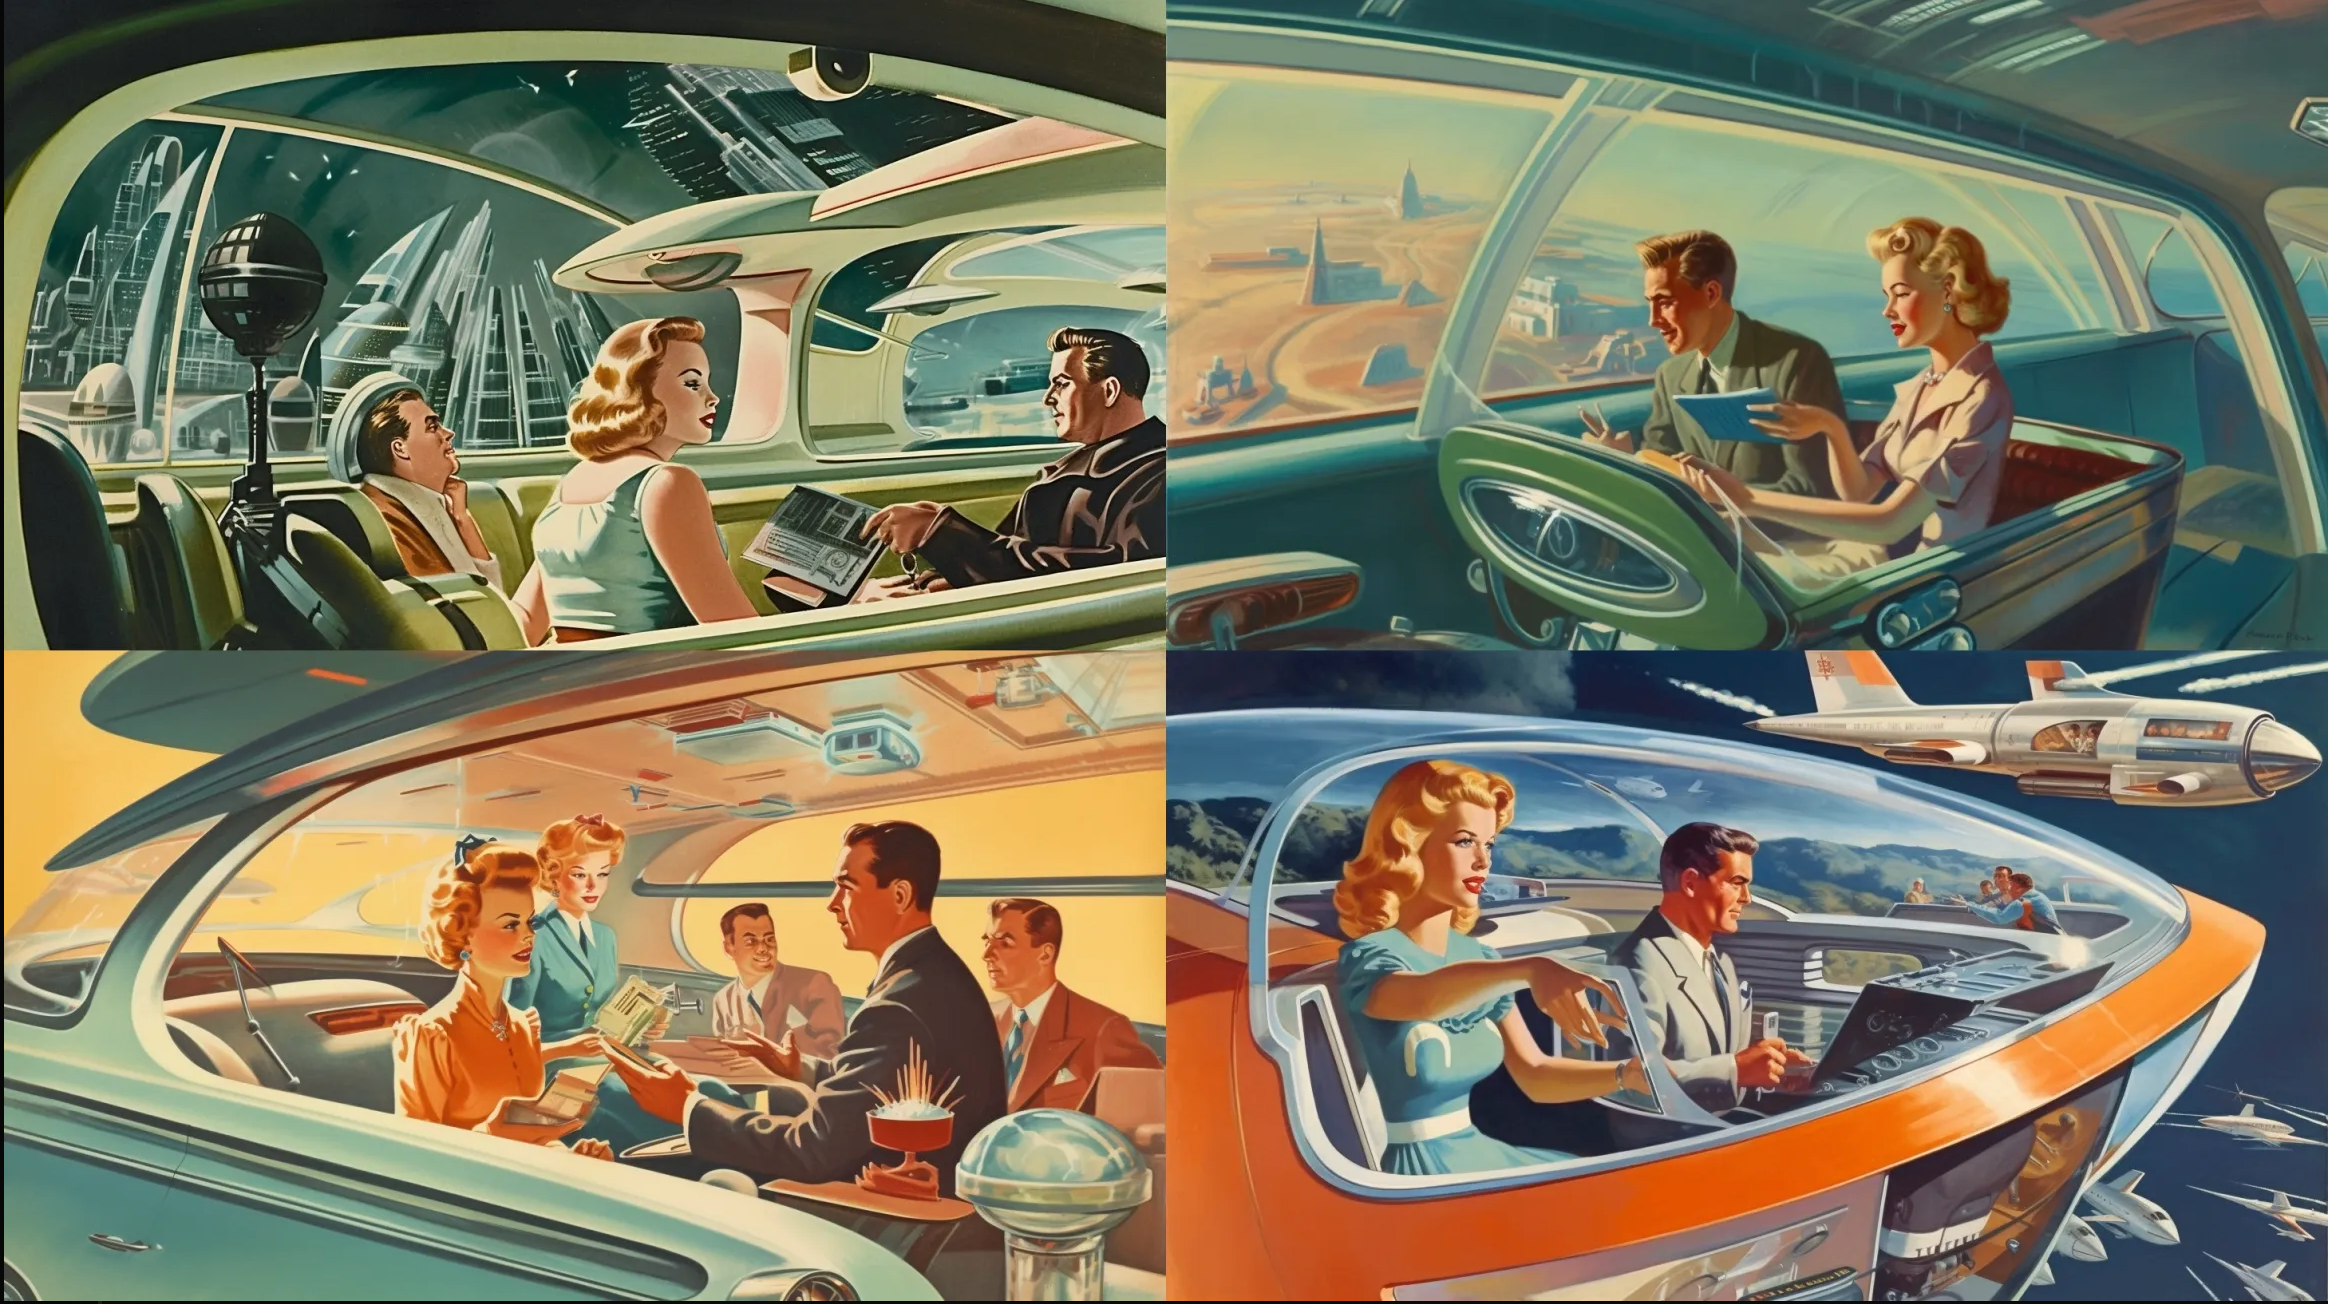 A couple and two children playing a game, in a self-driving car with a glass roof, driving on a highway, viewed from a high birds perspective  Retrofuturism theme by Arthur Radebaugh1 --ar 16:9